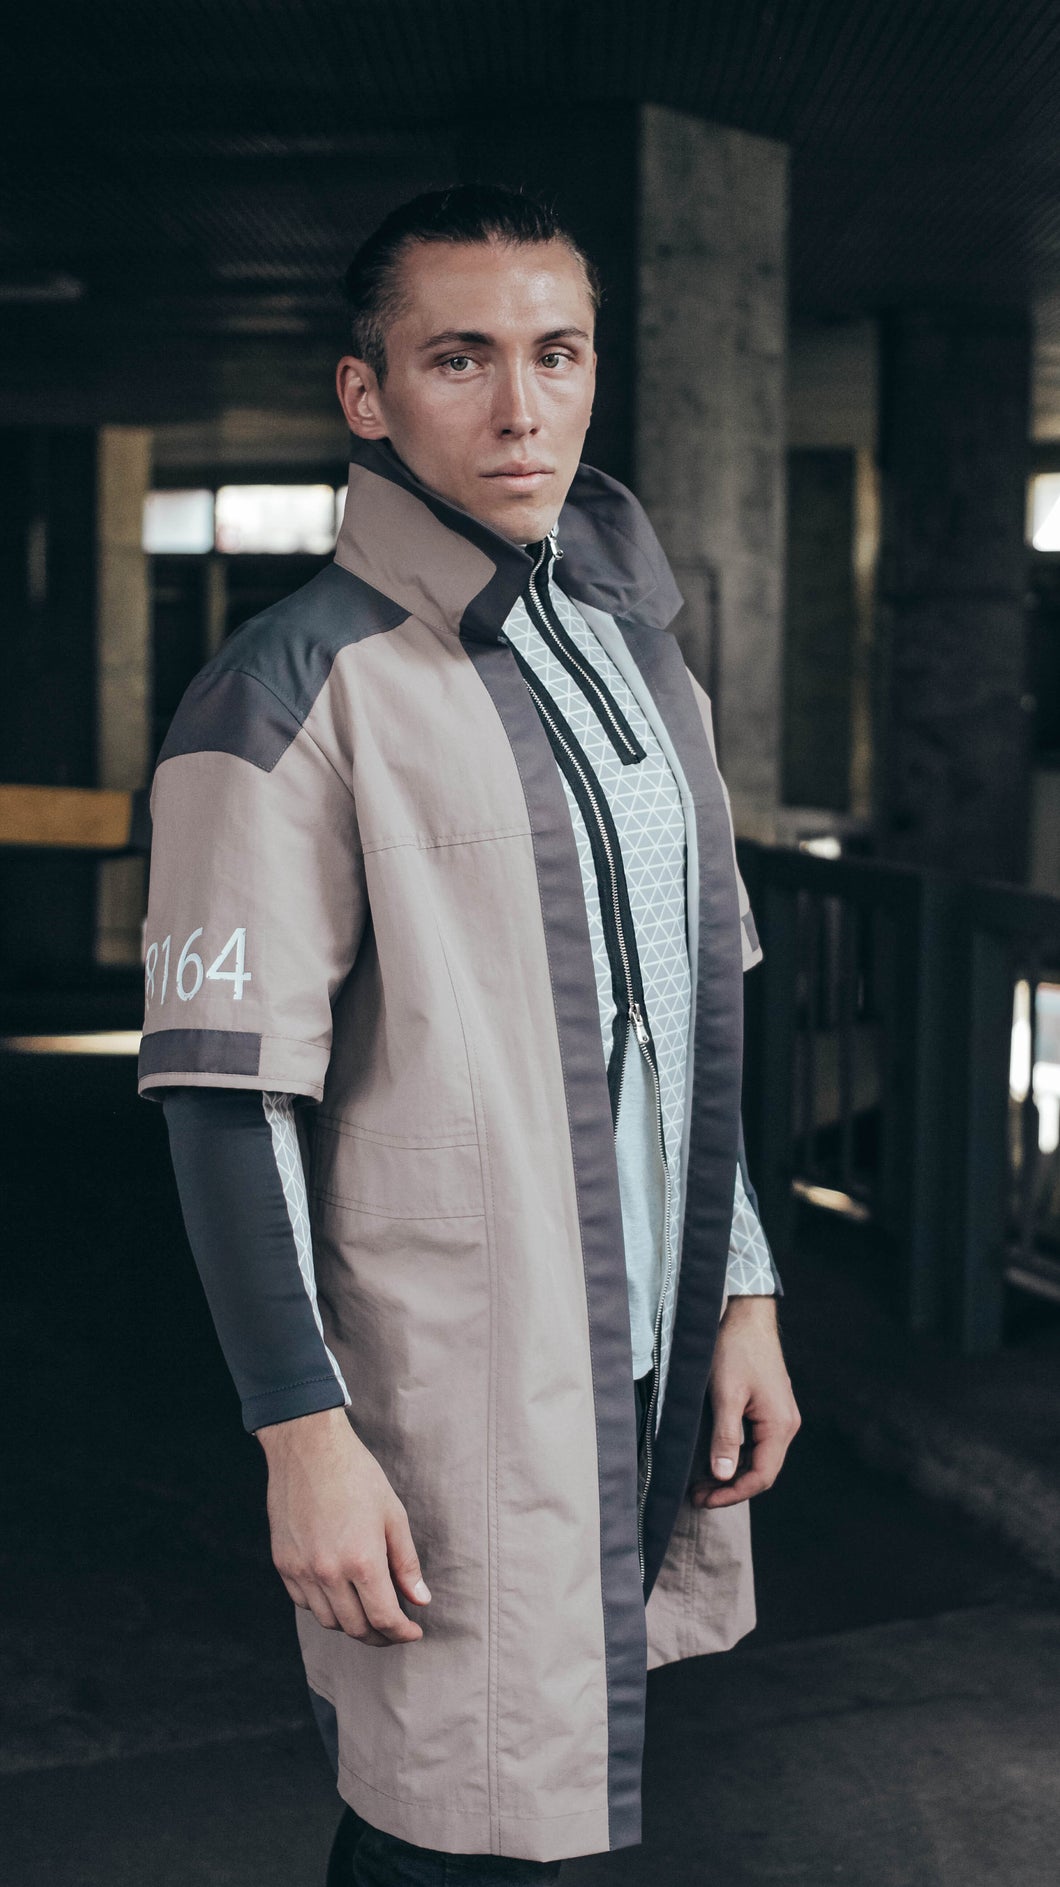 Detroit become human Marcus cosplay costume DBC RK200 Marcus Cosplay costume Robot cosplay Costume Uniform Men's Android Cosplay